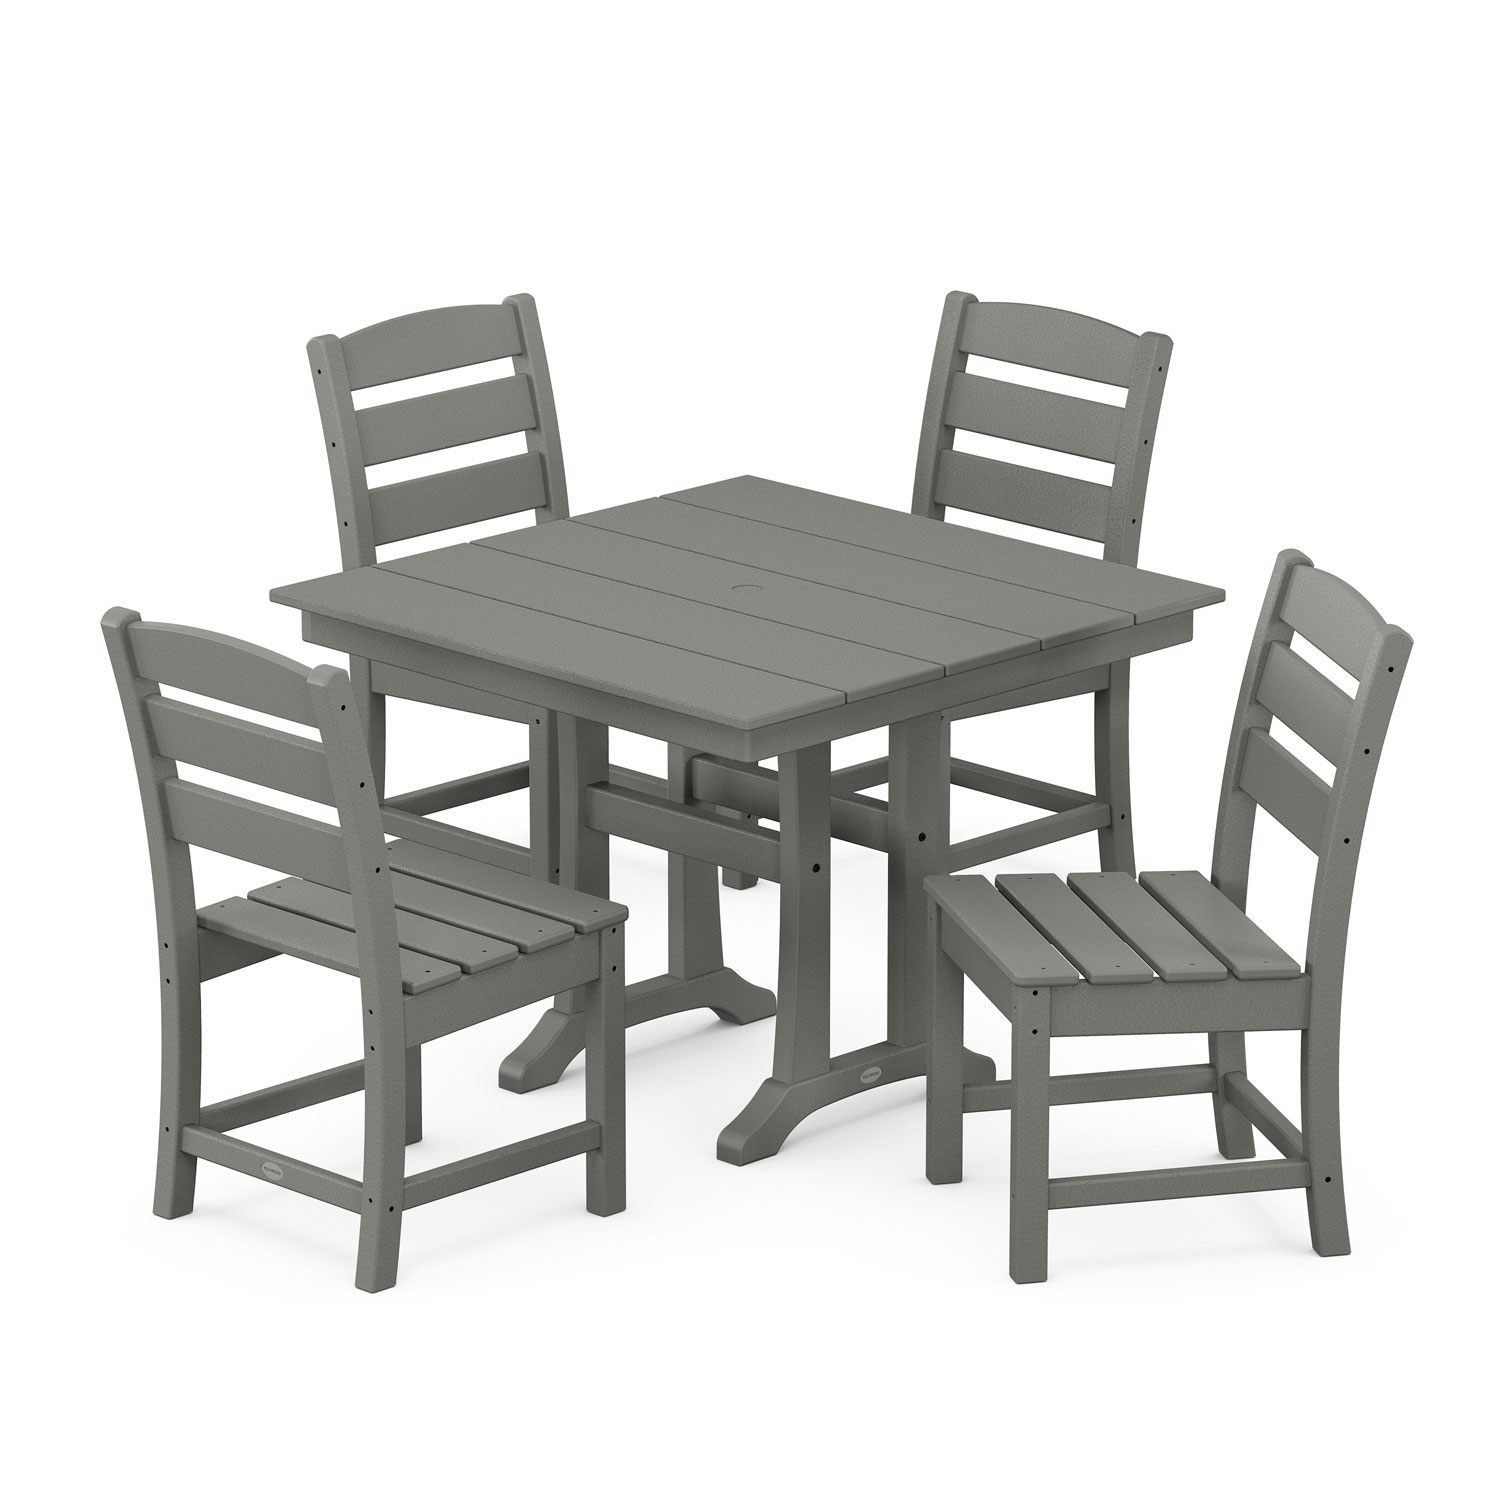 Patio Dining Sets Category